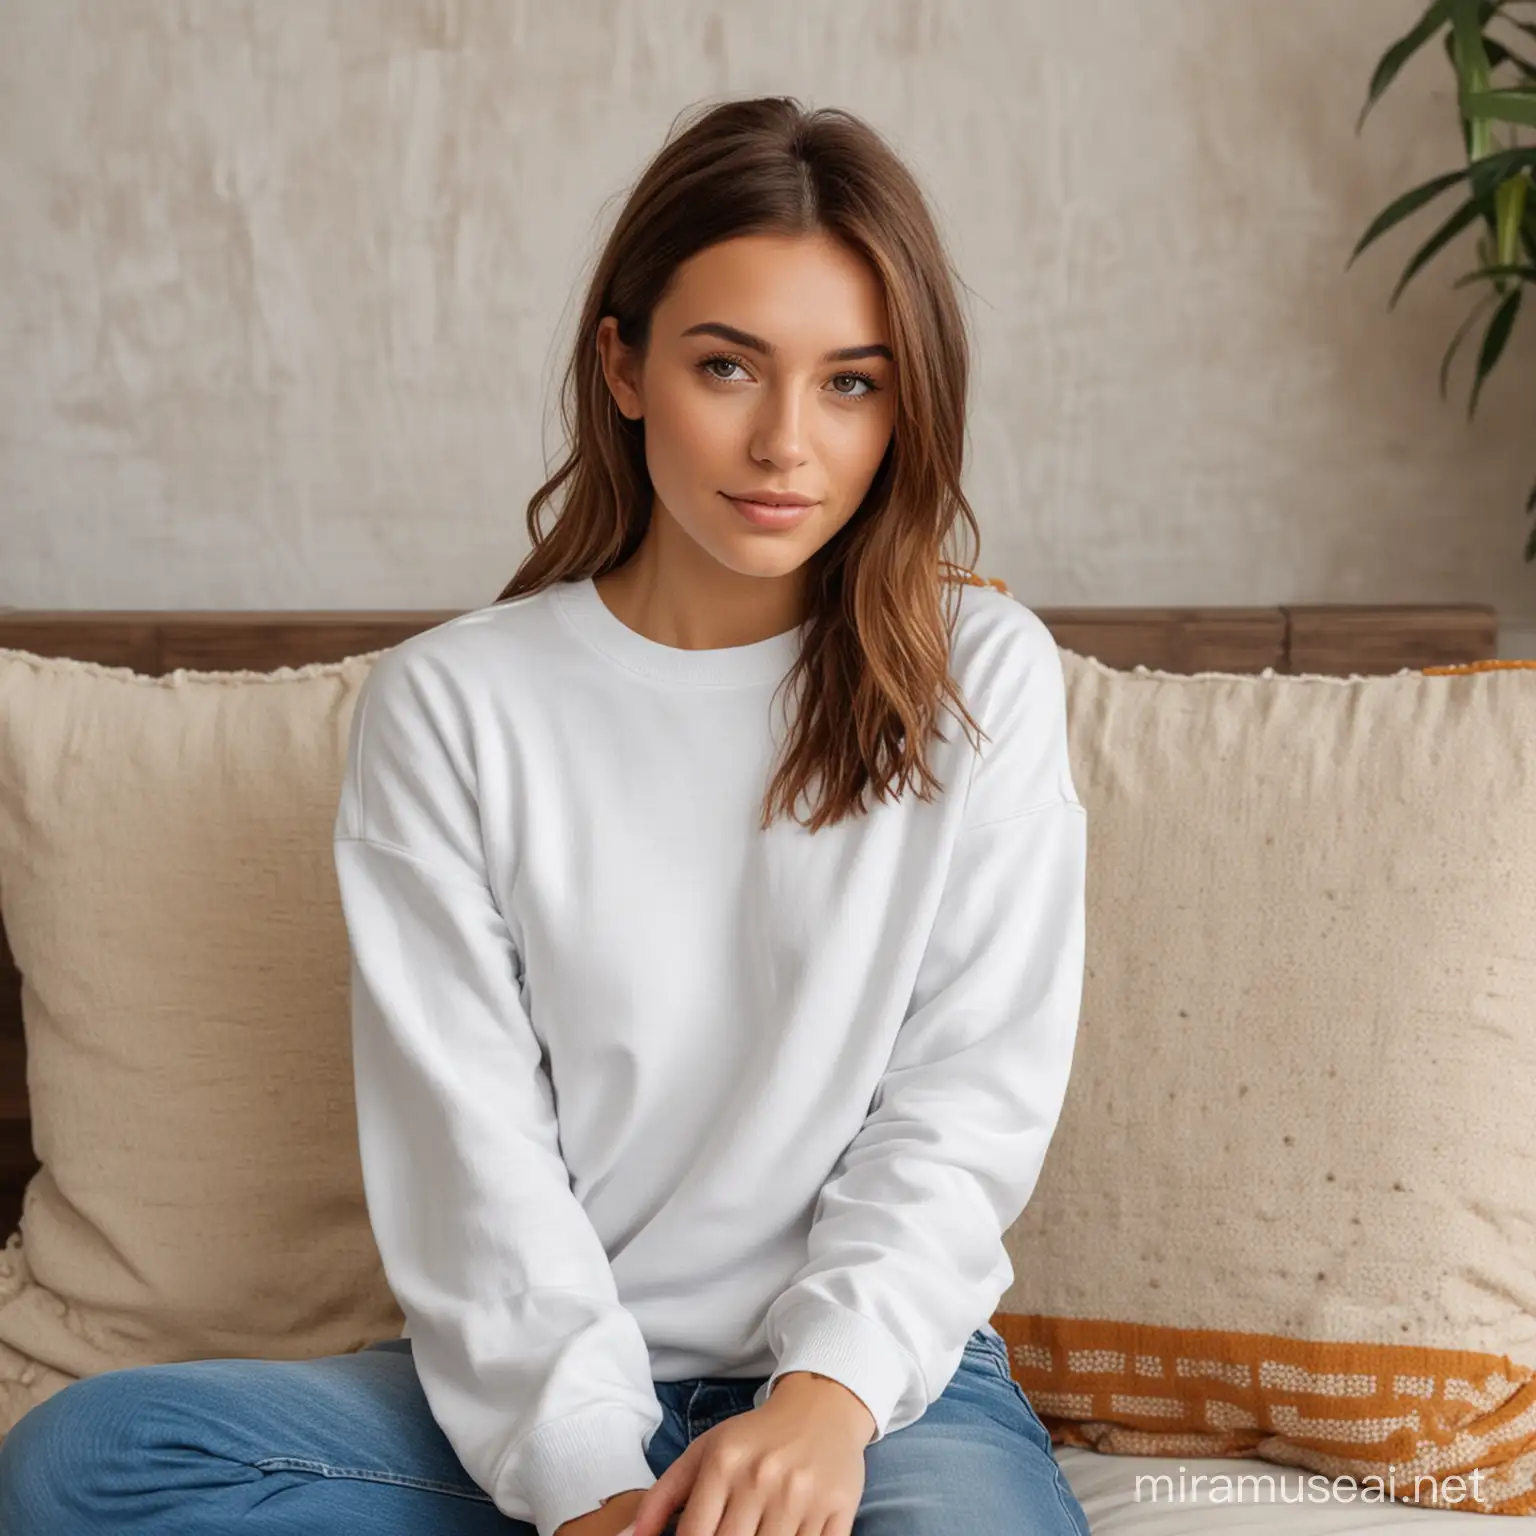 young women, with brown hair over her shoulders, wearing a white crewneck sweatshirt, boho background with pillows, sitting down, facing the camera